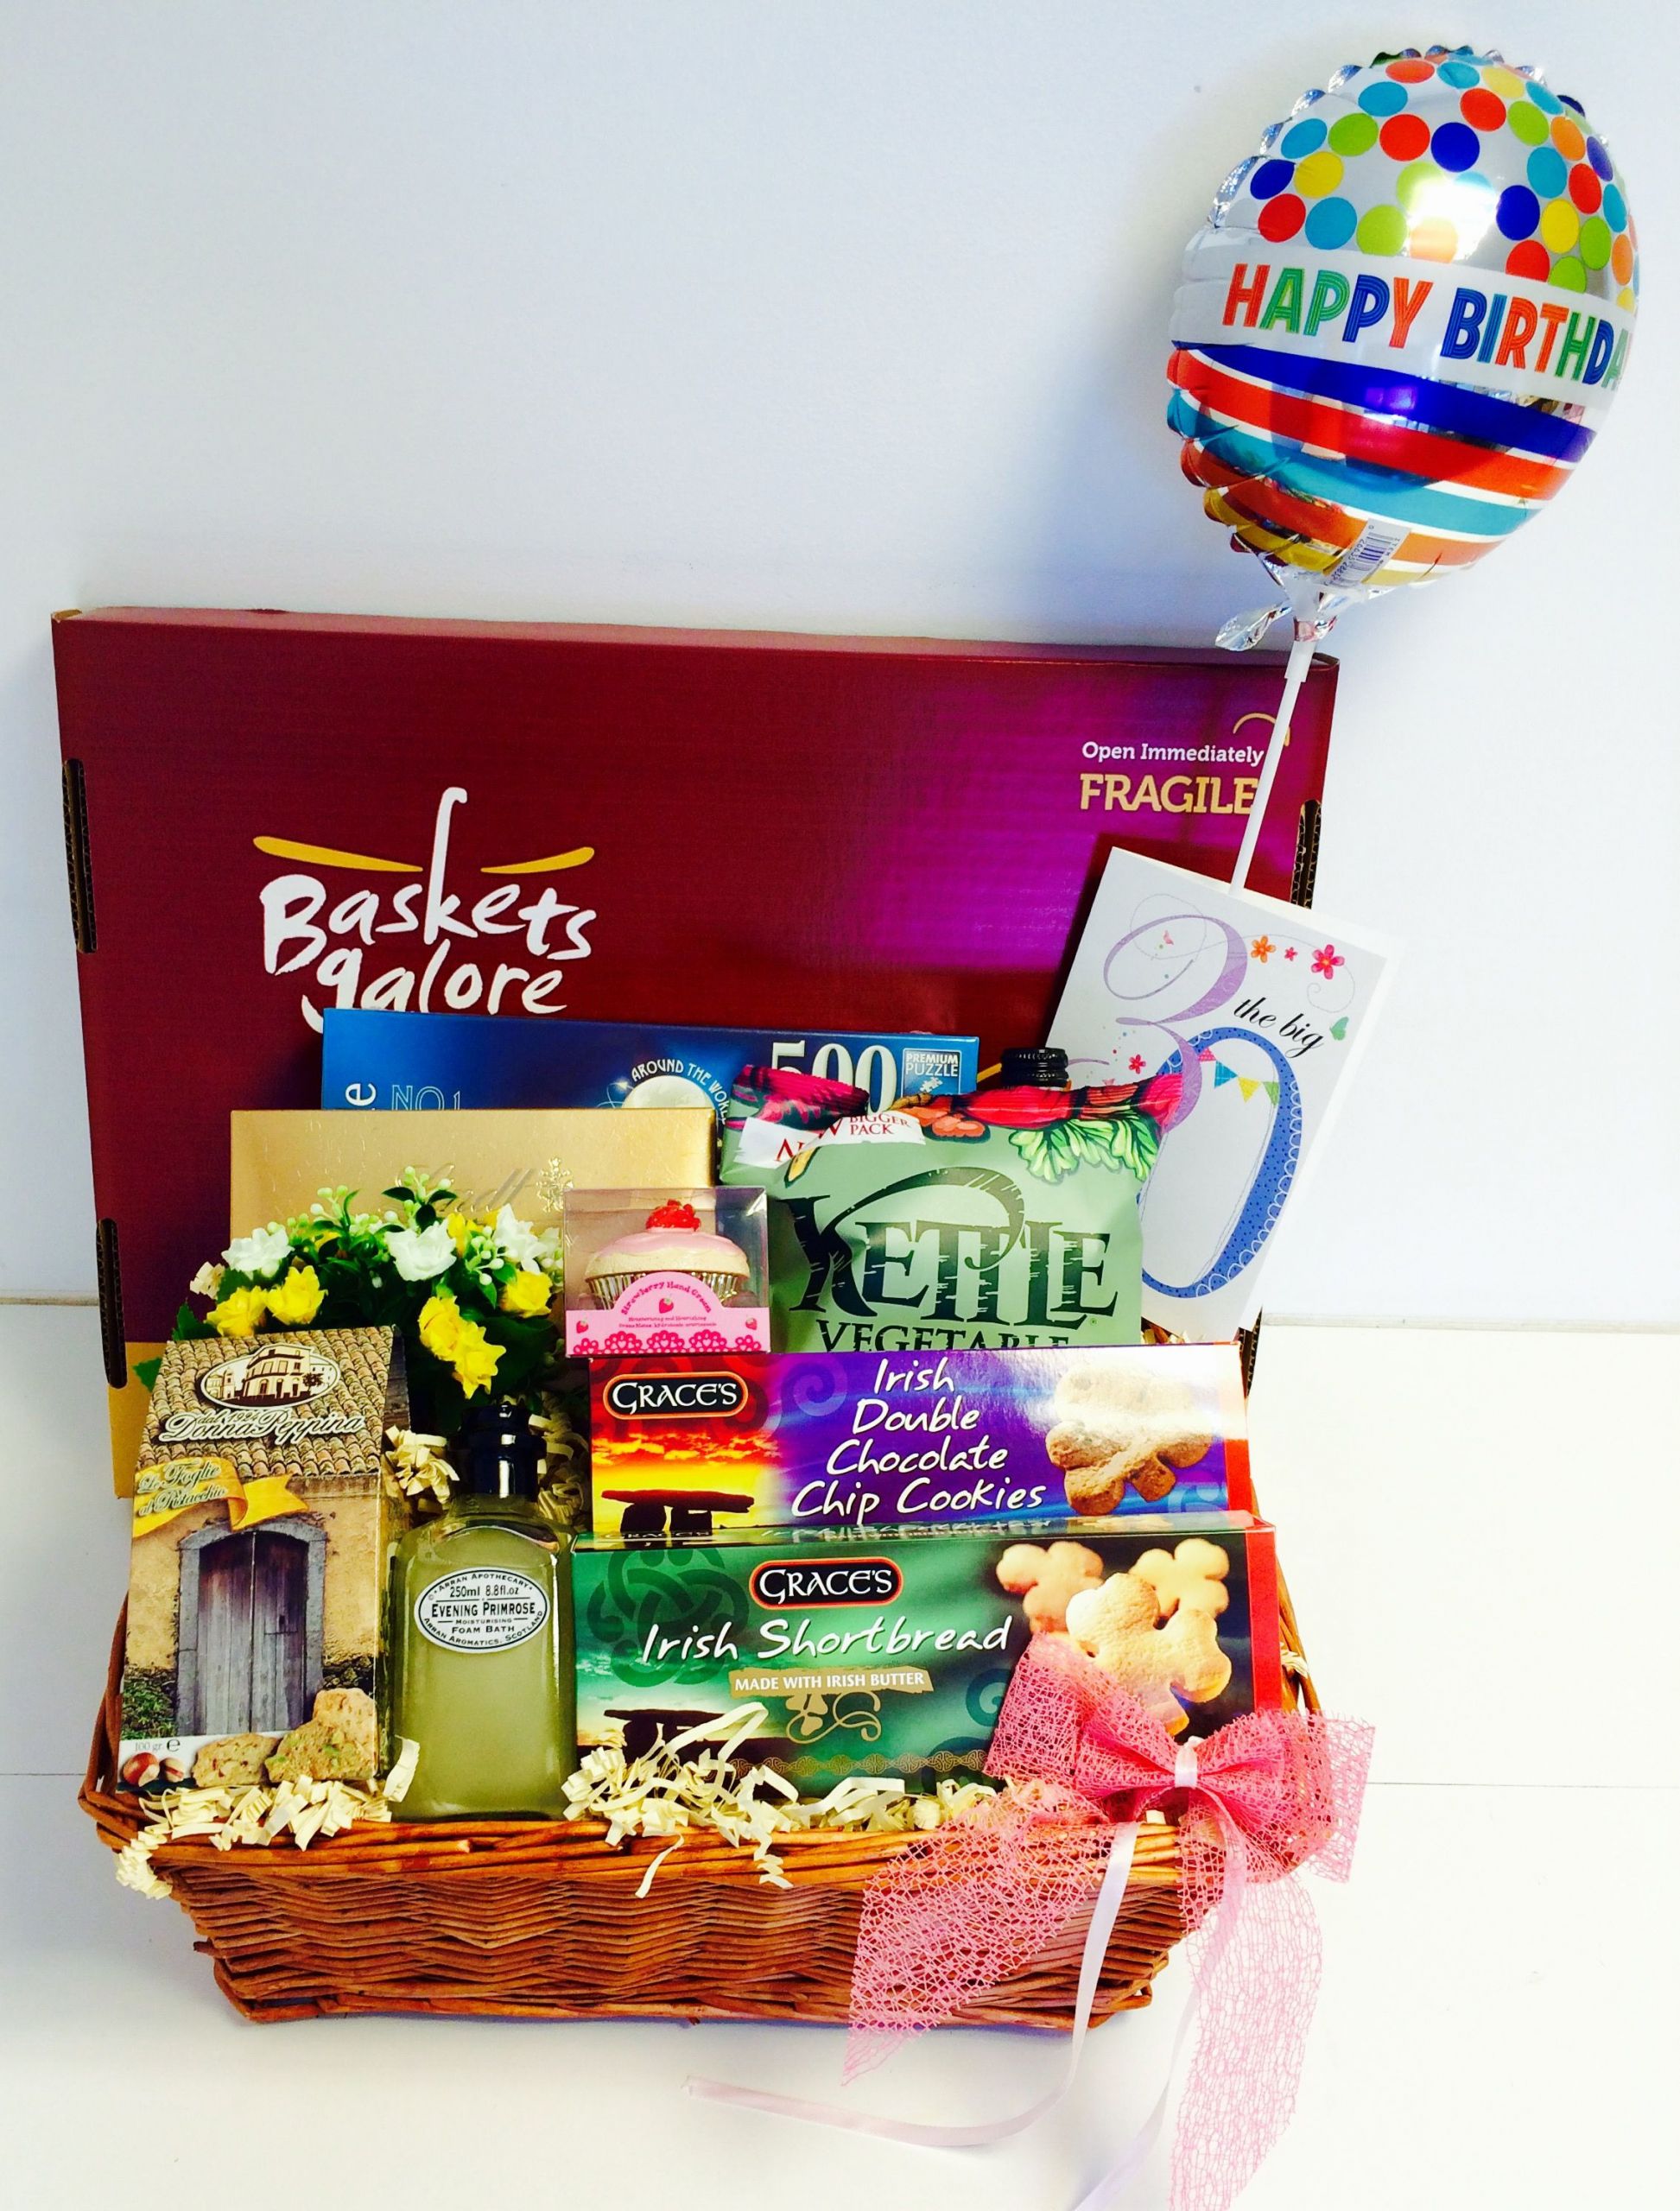 Gift Basket Ideas For Her
 30th Birthday Gift Basket For Her with a birthday balloon